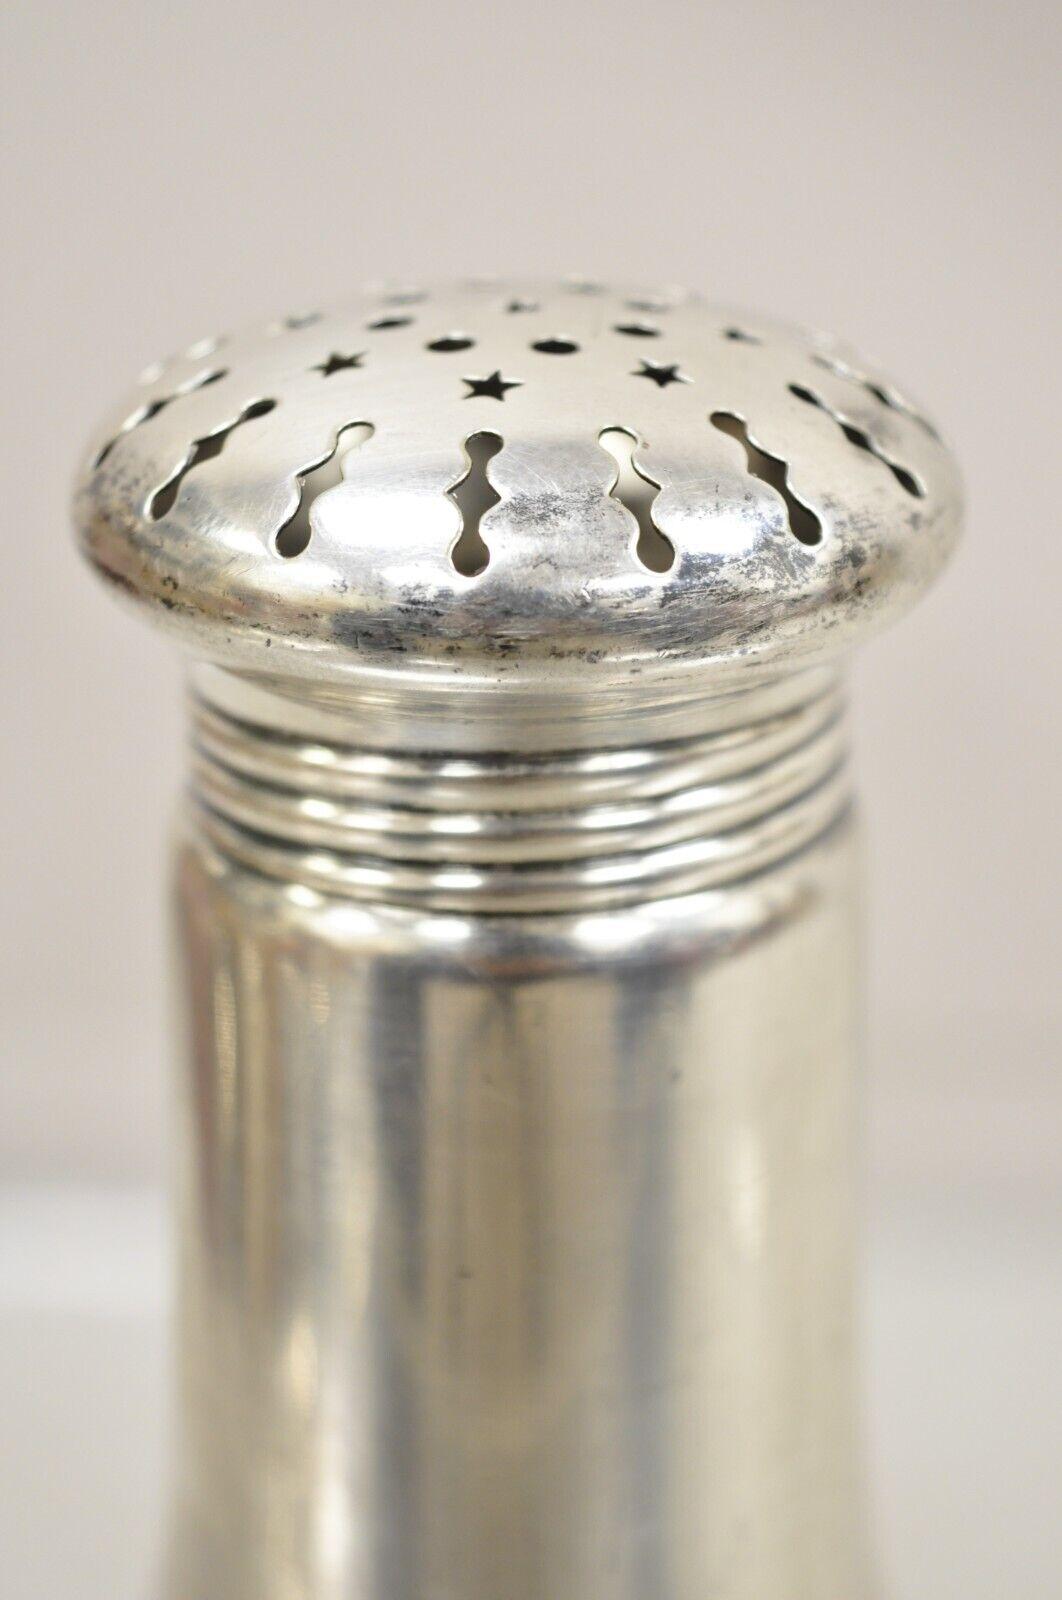 20th Century Antique Wilcox SP Co. 4281 Silver Plated Seasoning Spice Shaker 